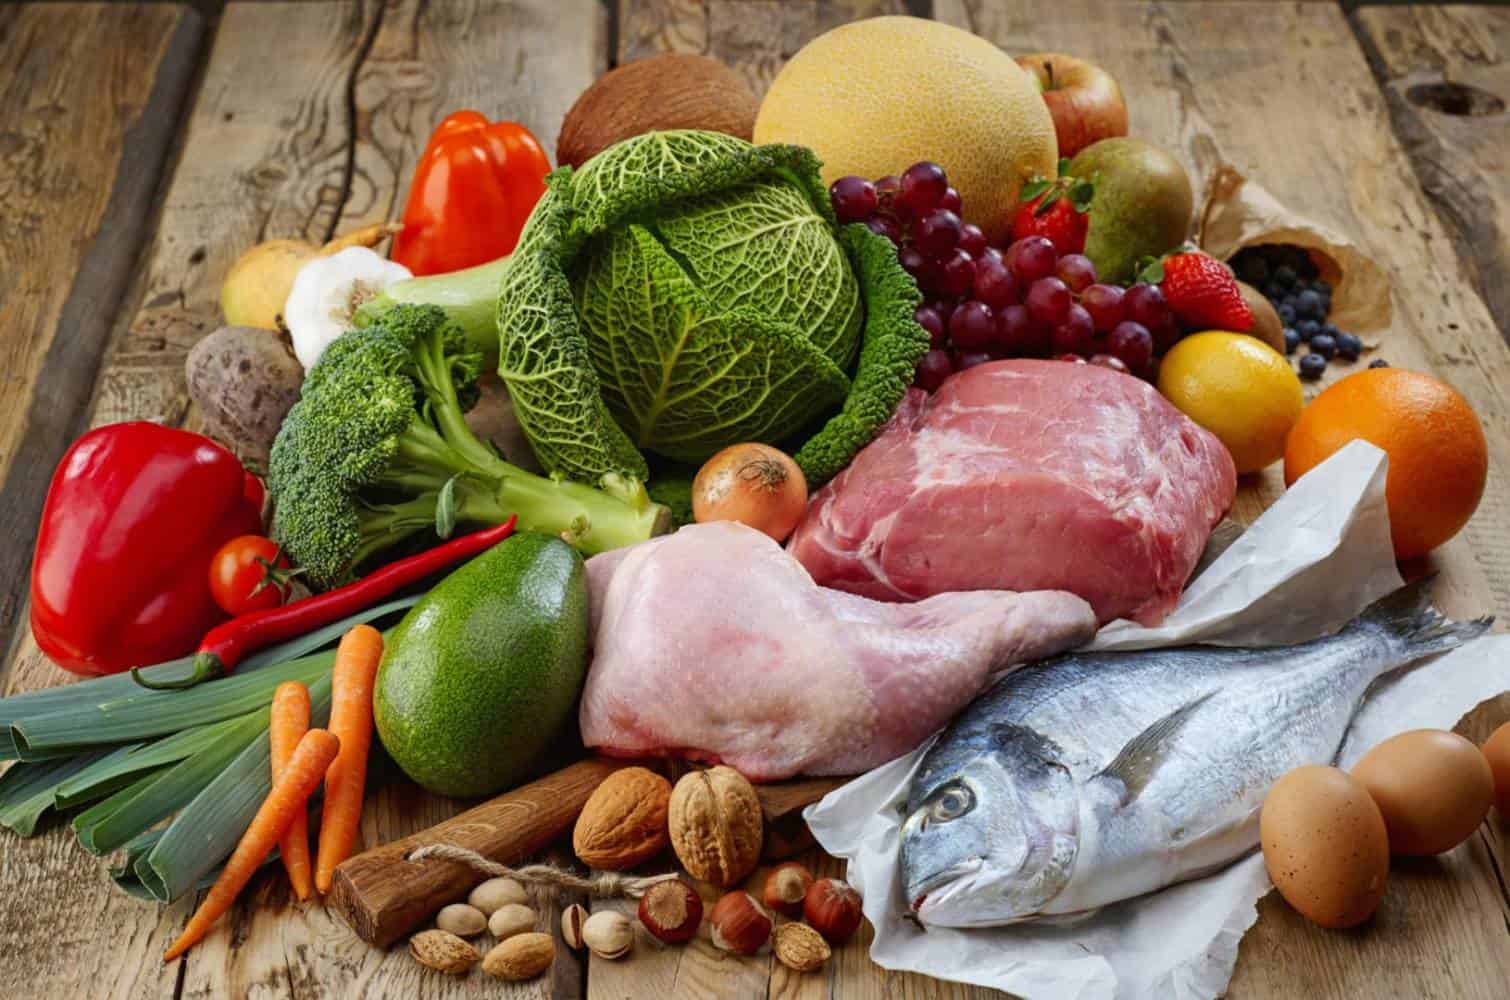 What is Paleo and Why Should I Care?